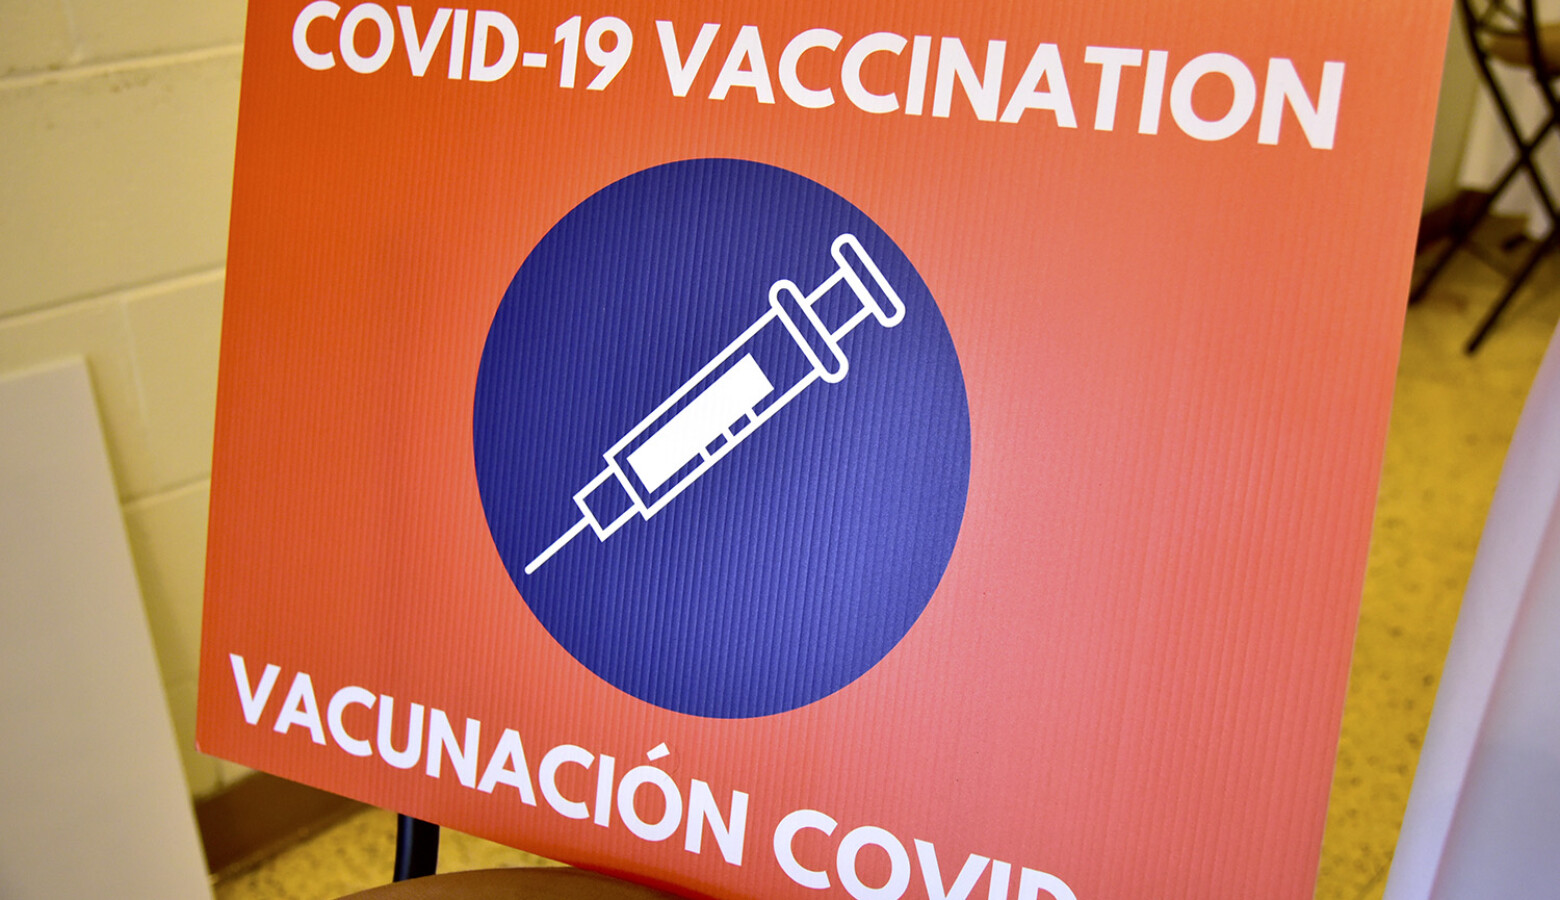 Hoosiers 60 and older can now register for appointments to receive a COVID-19 vaccine. The Indiana Department of Health announced the expansion Tuesday. (Justin Hicks/IPB News)